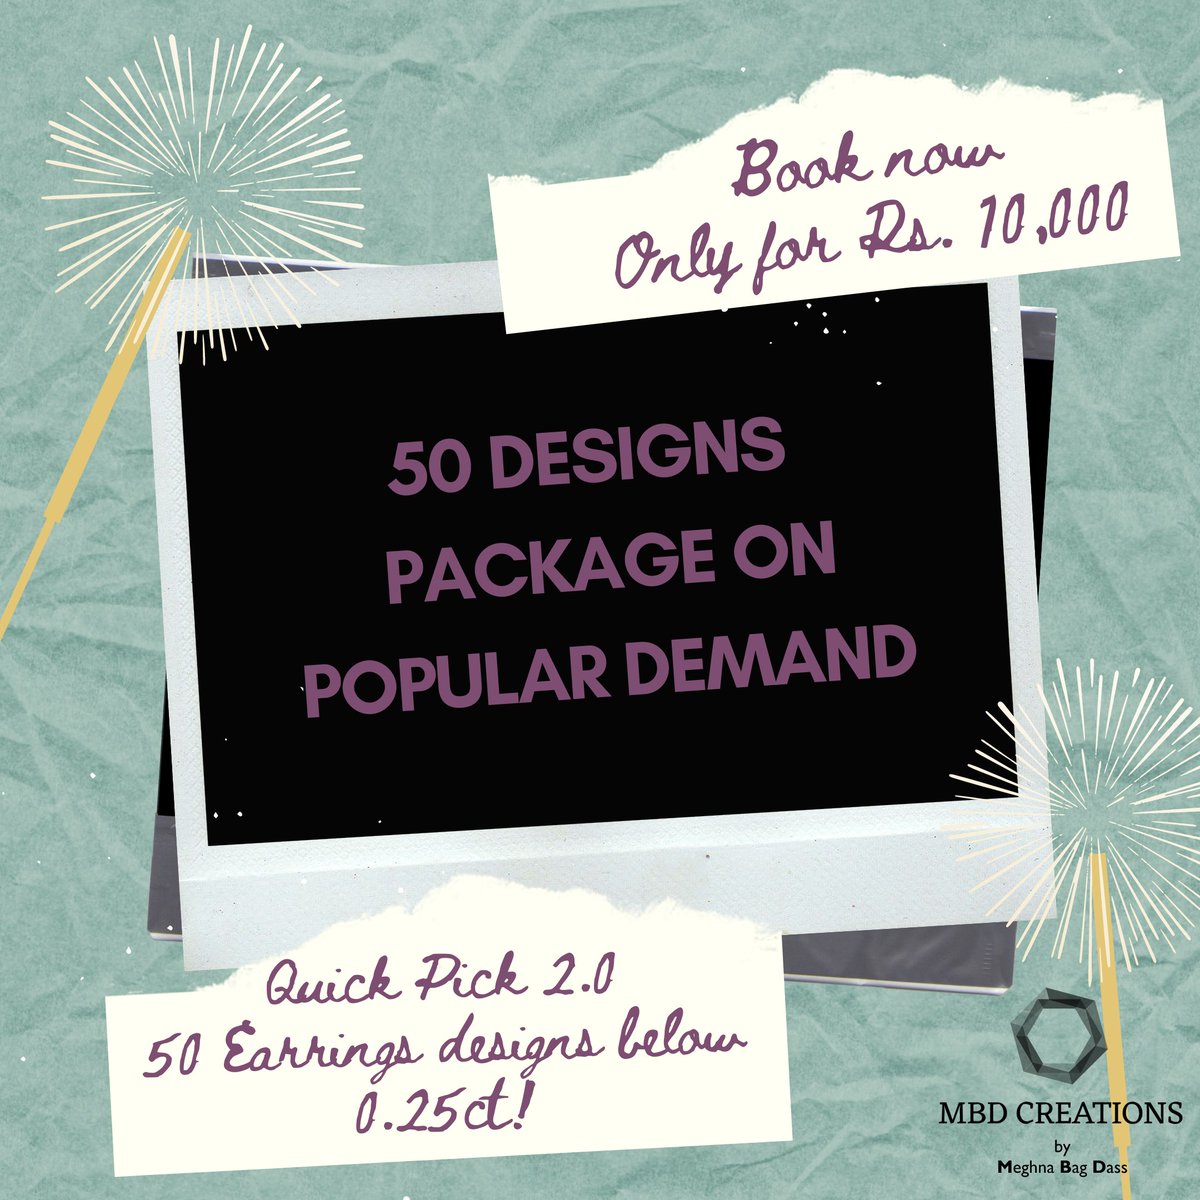 On popular demand we are back with QUICK PICK 2.0
50 exclusive new Earrings Designs within 0.25ct diamond weight .
lnkd.in/d4Jt-r3
#jewelry #jewelrydesigner #diamonds #gold #goldjewelery #jewellerydesigning #swarovski #swarovskijewelery #DesignInspiration #designthinking